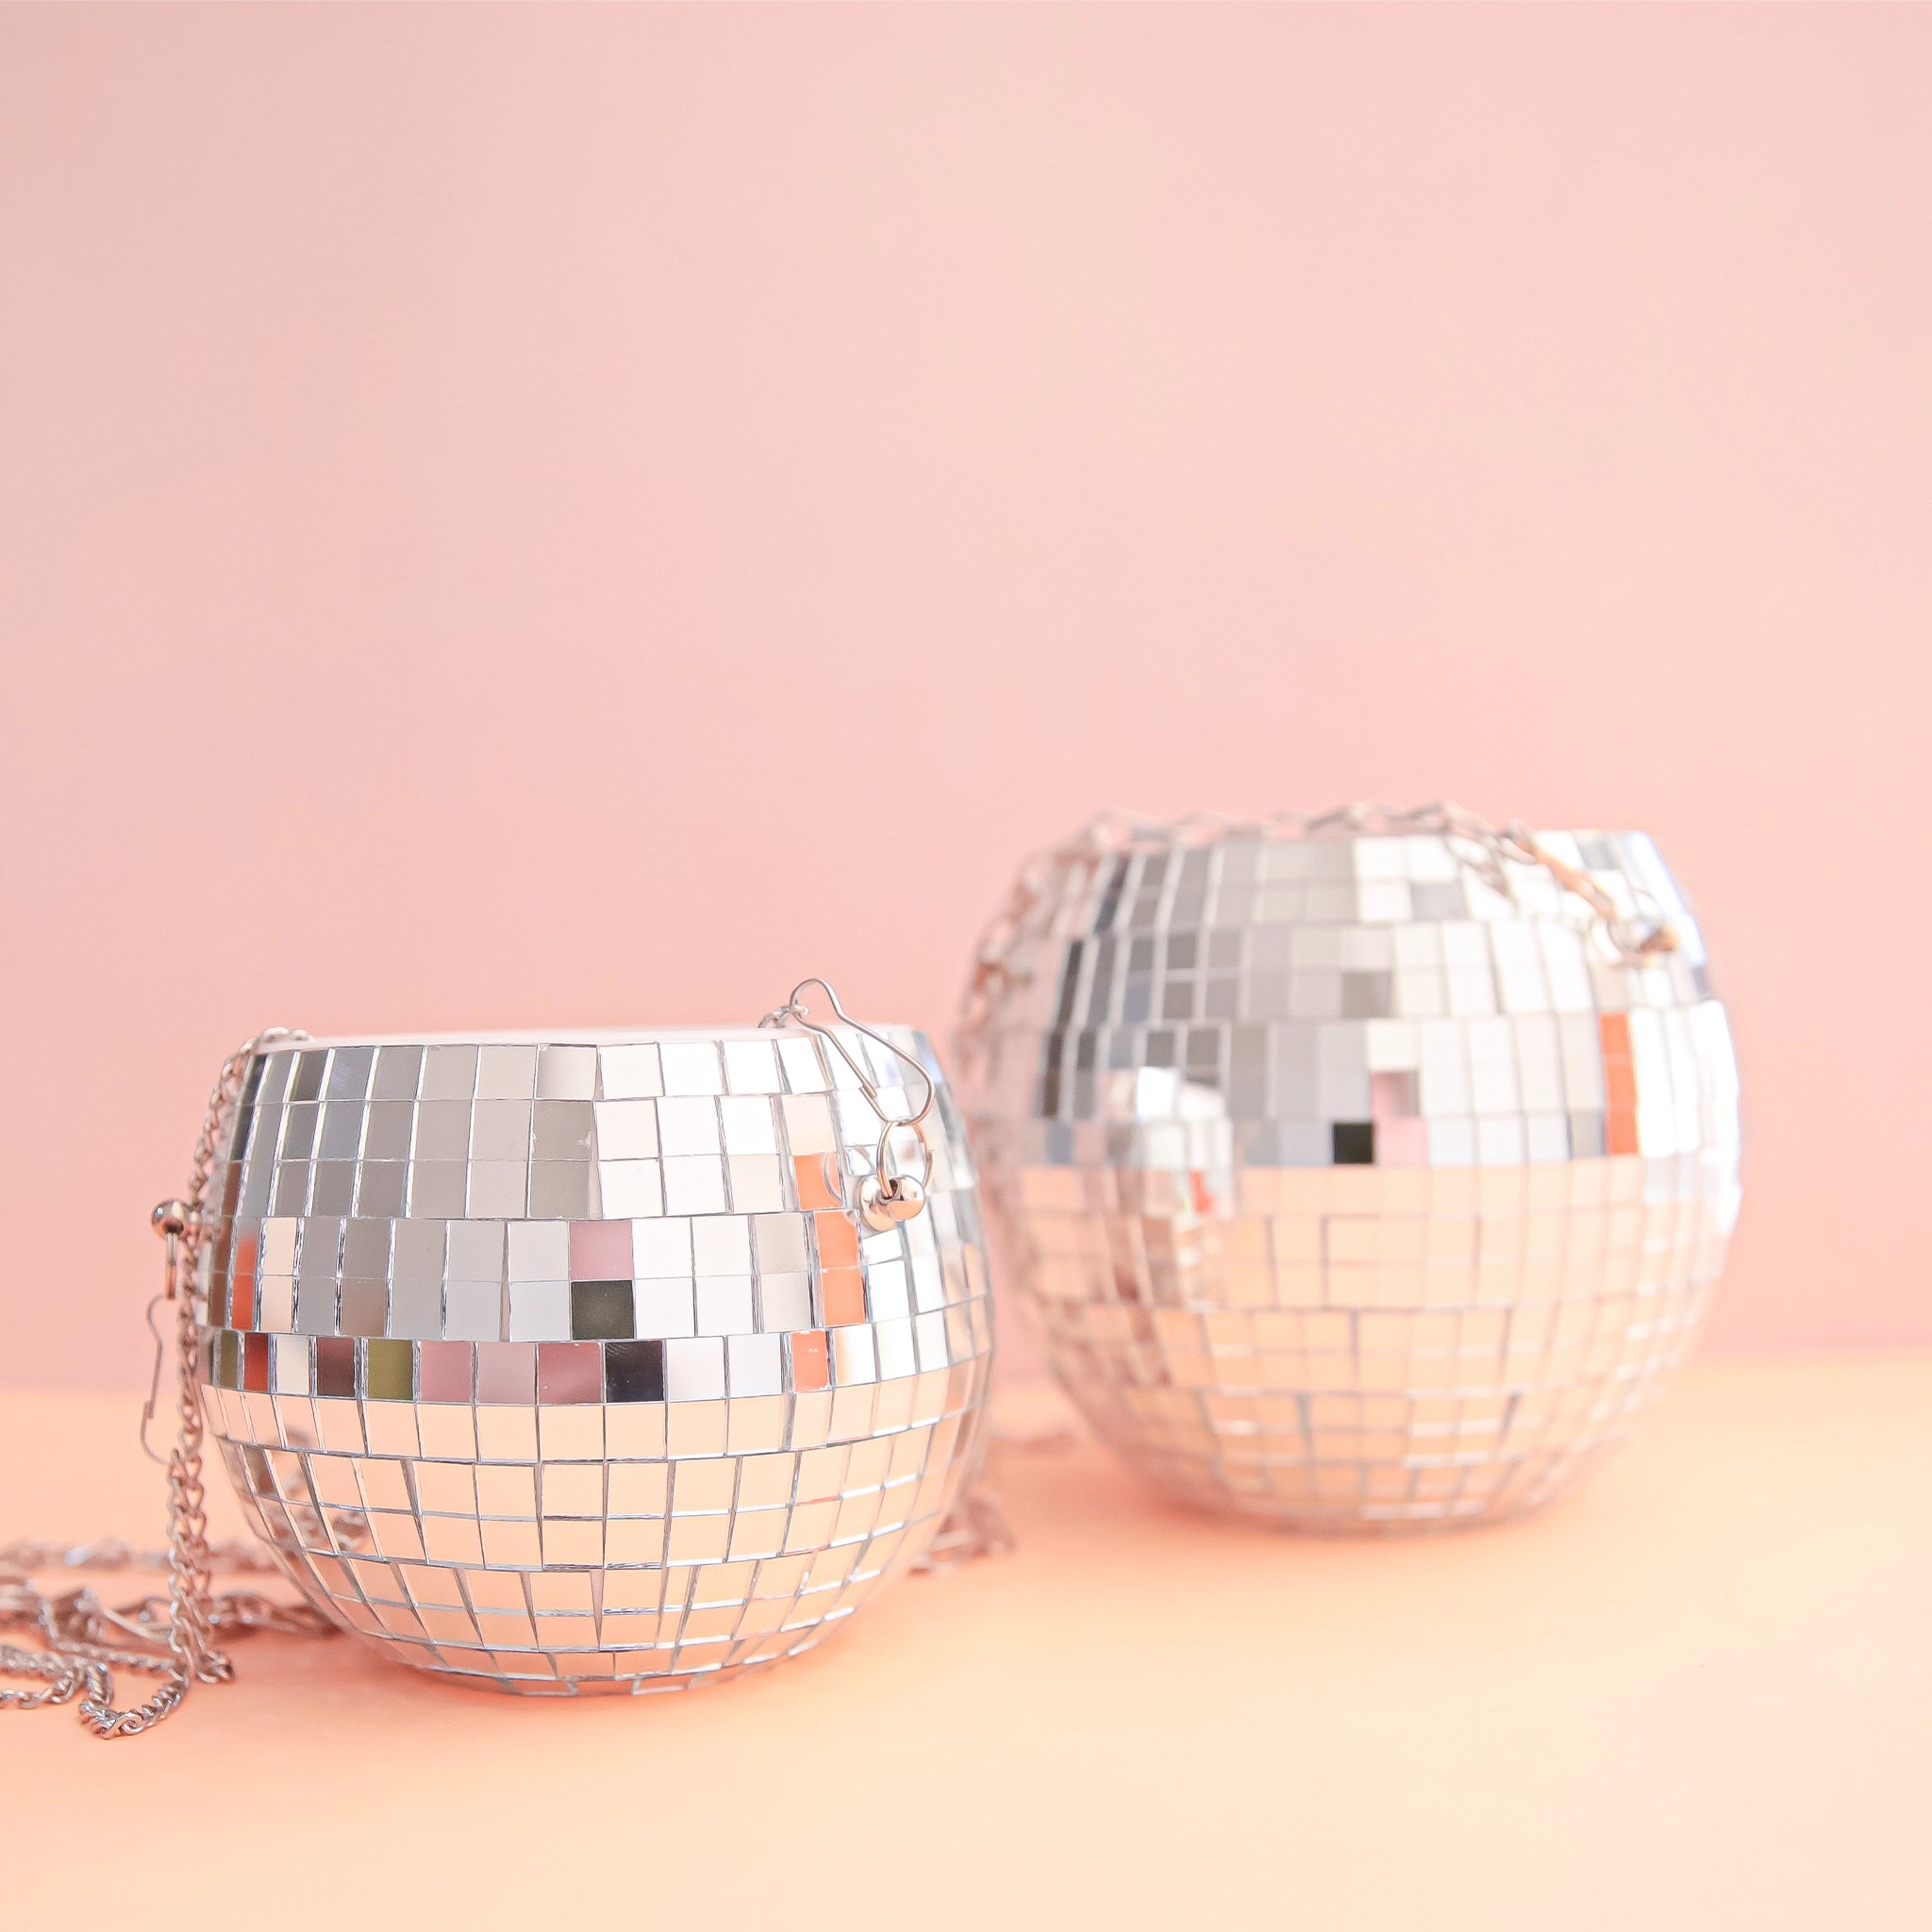 On a soft pink background is the two available sizes of the hanging disco ball planter. 